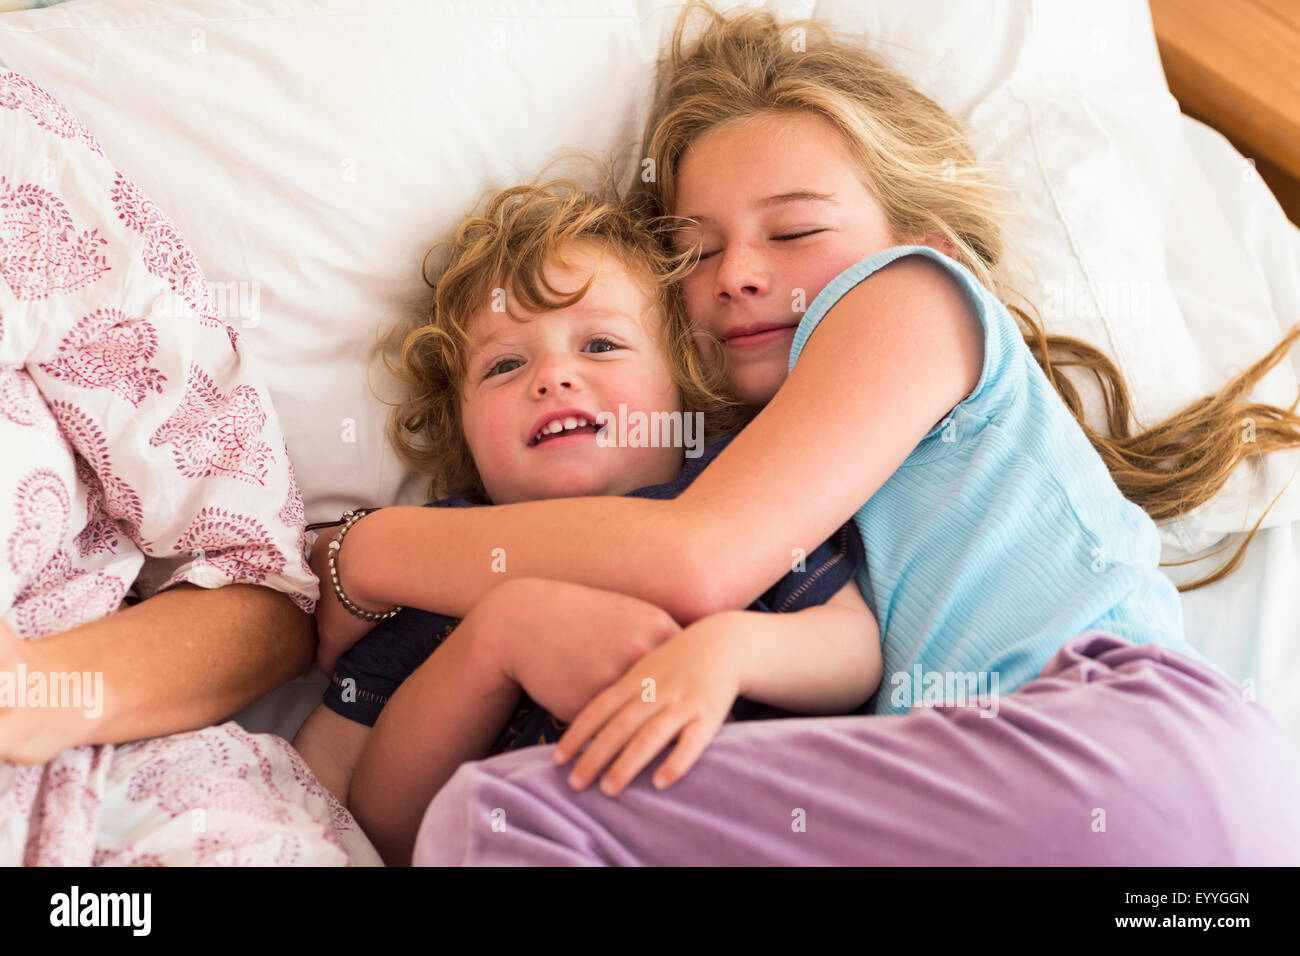 Caucasian brother and sister cuddling on bed Stock Photo